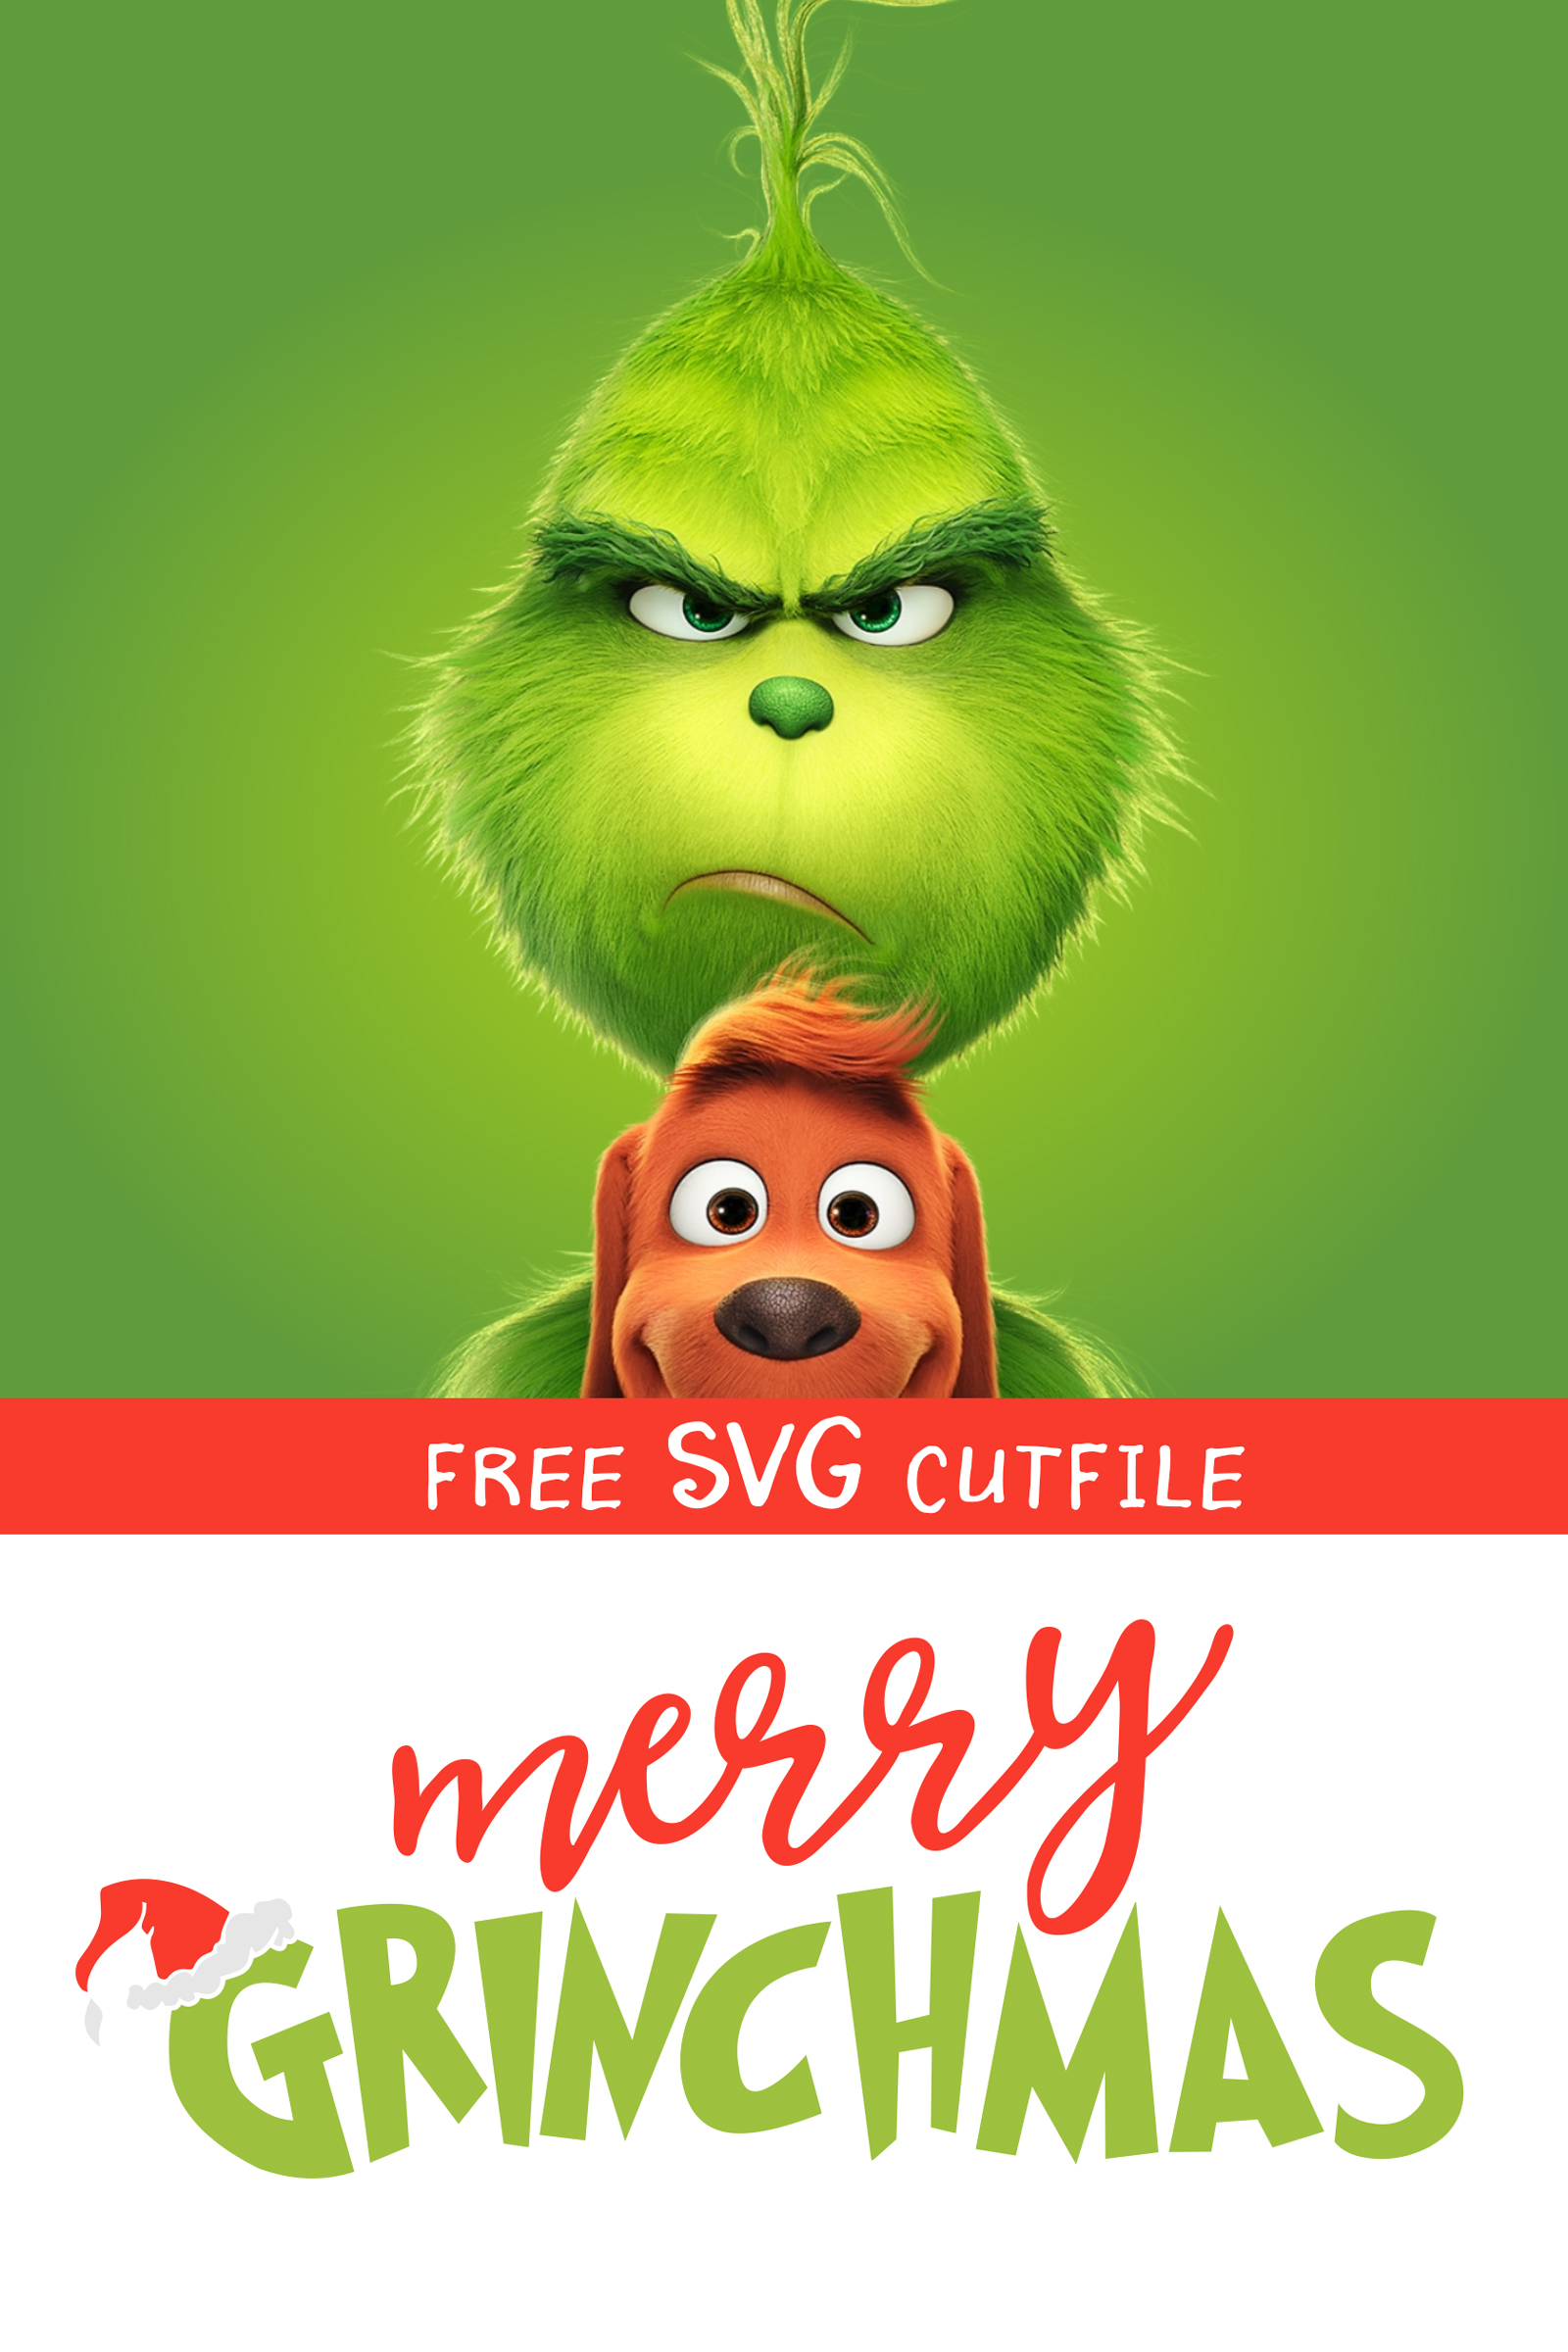 Download Merry Grinchsmas Free Svg Cutfile Awesome With Sprinkles SVG, PNG, EPS, DXF File